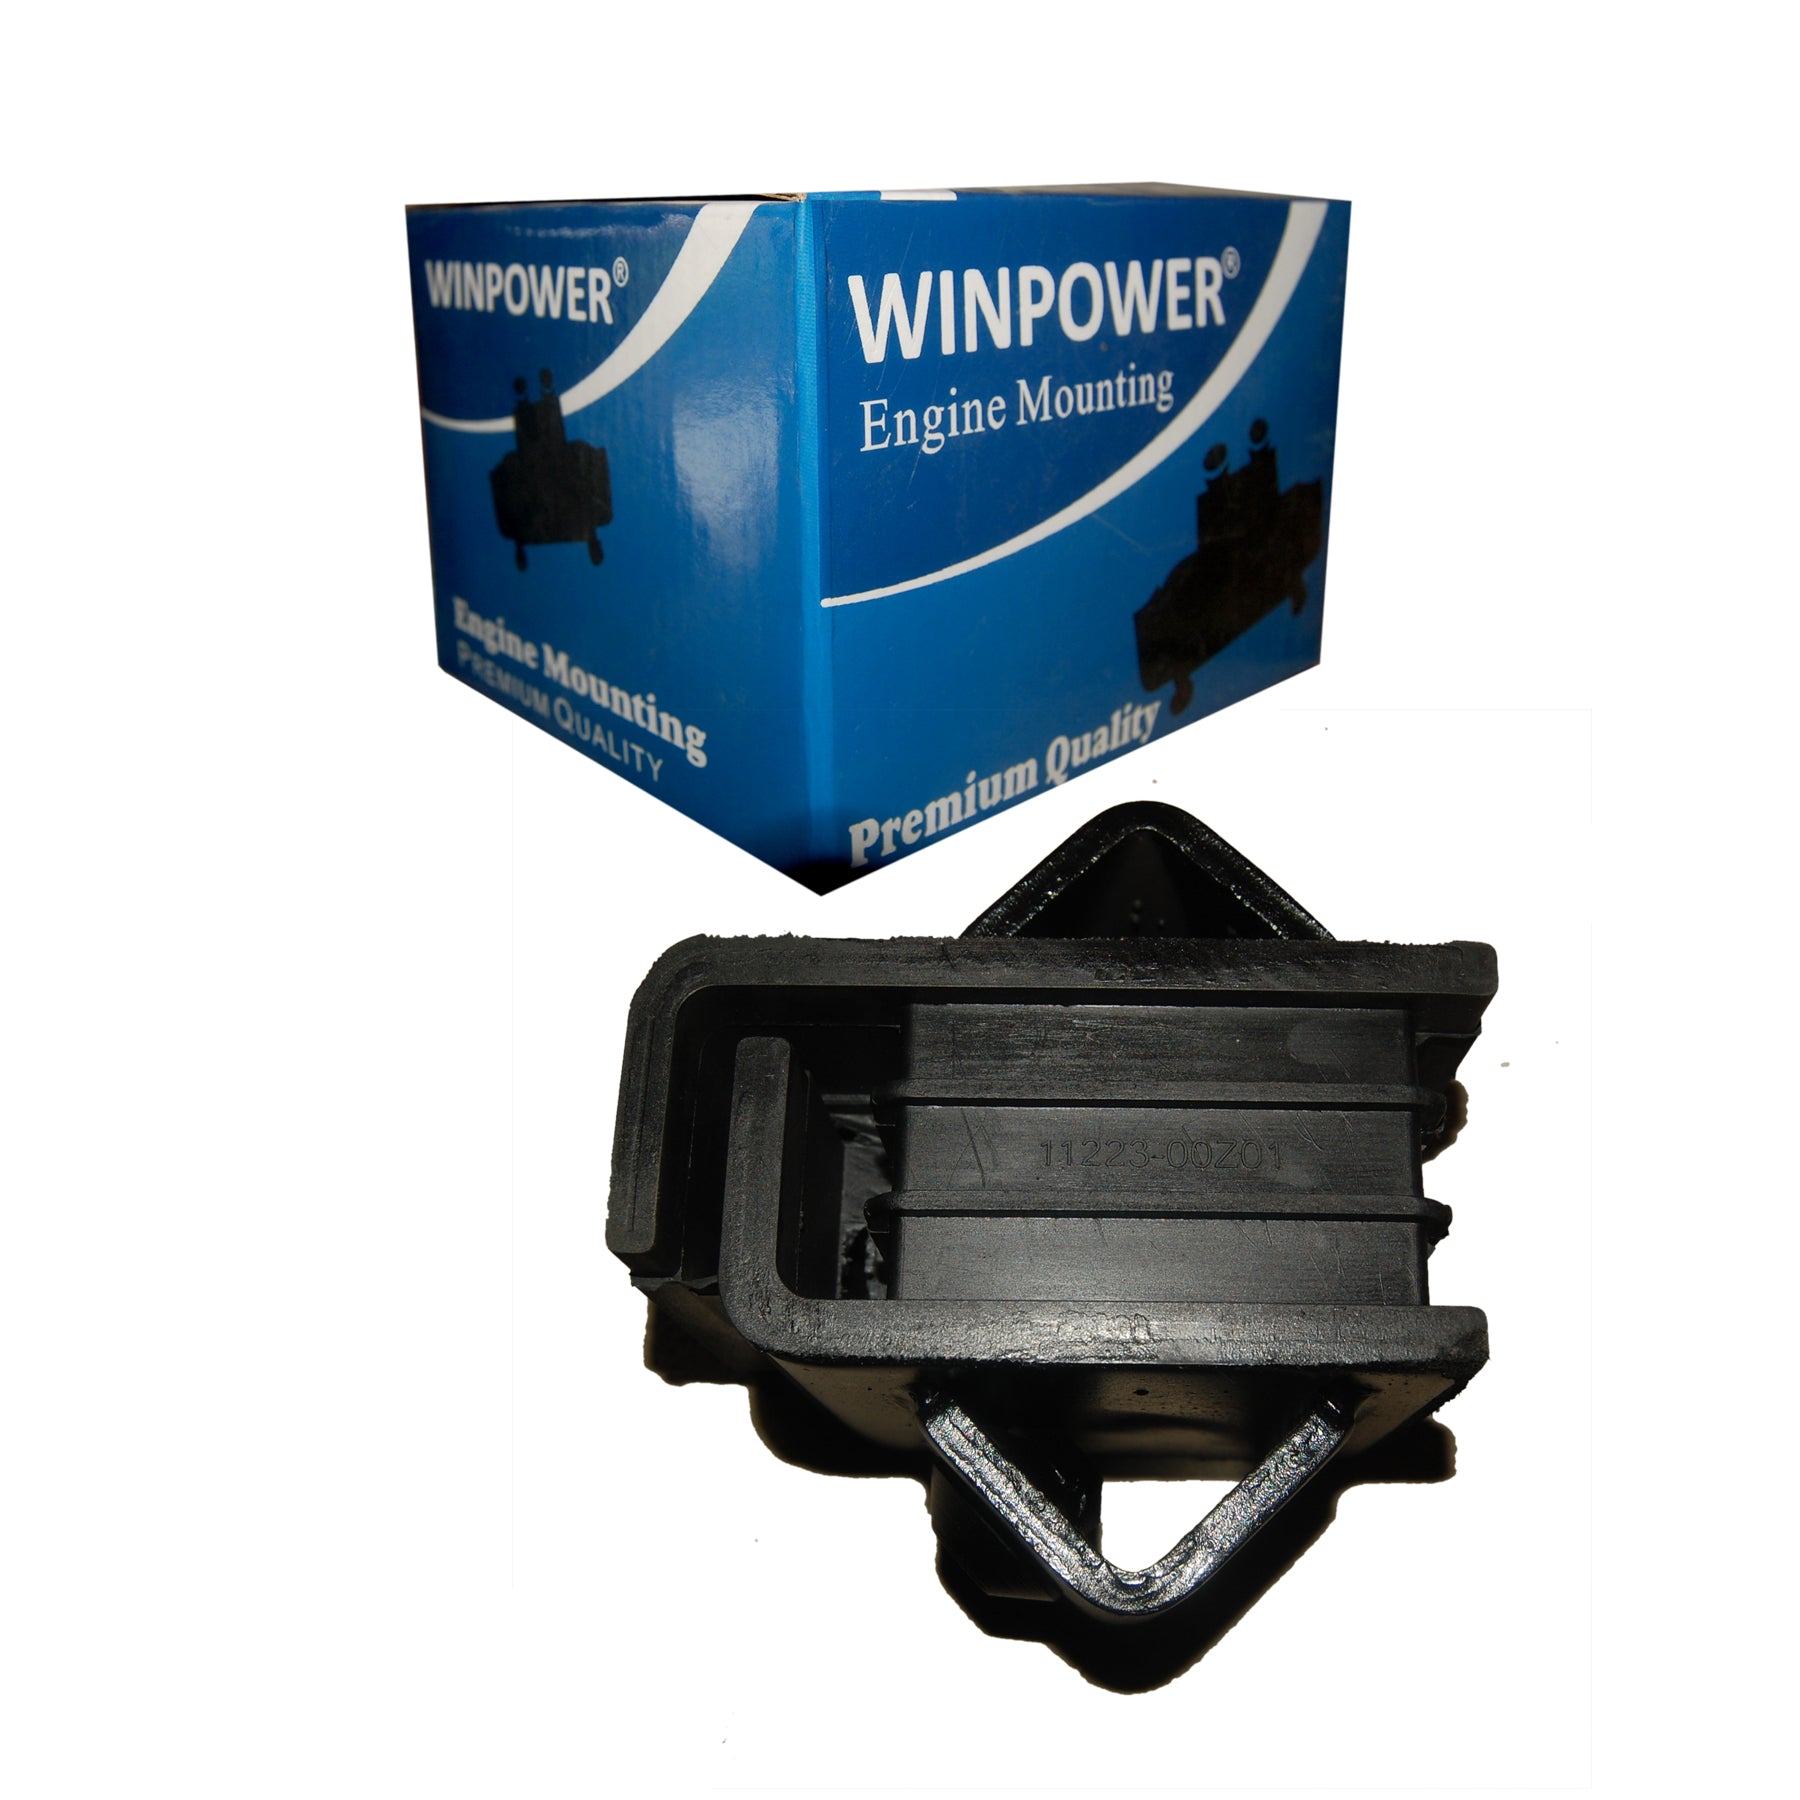 Engine Mounting, WINPOWER, 11223-00Z01 (005825) - Win Store